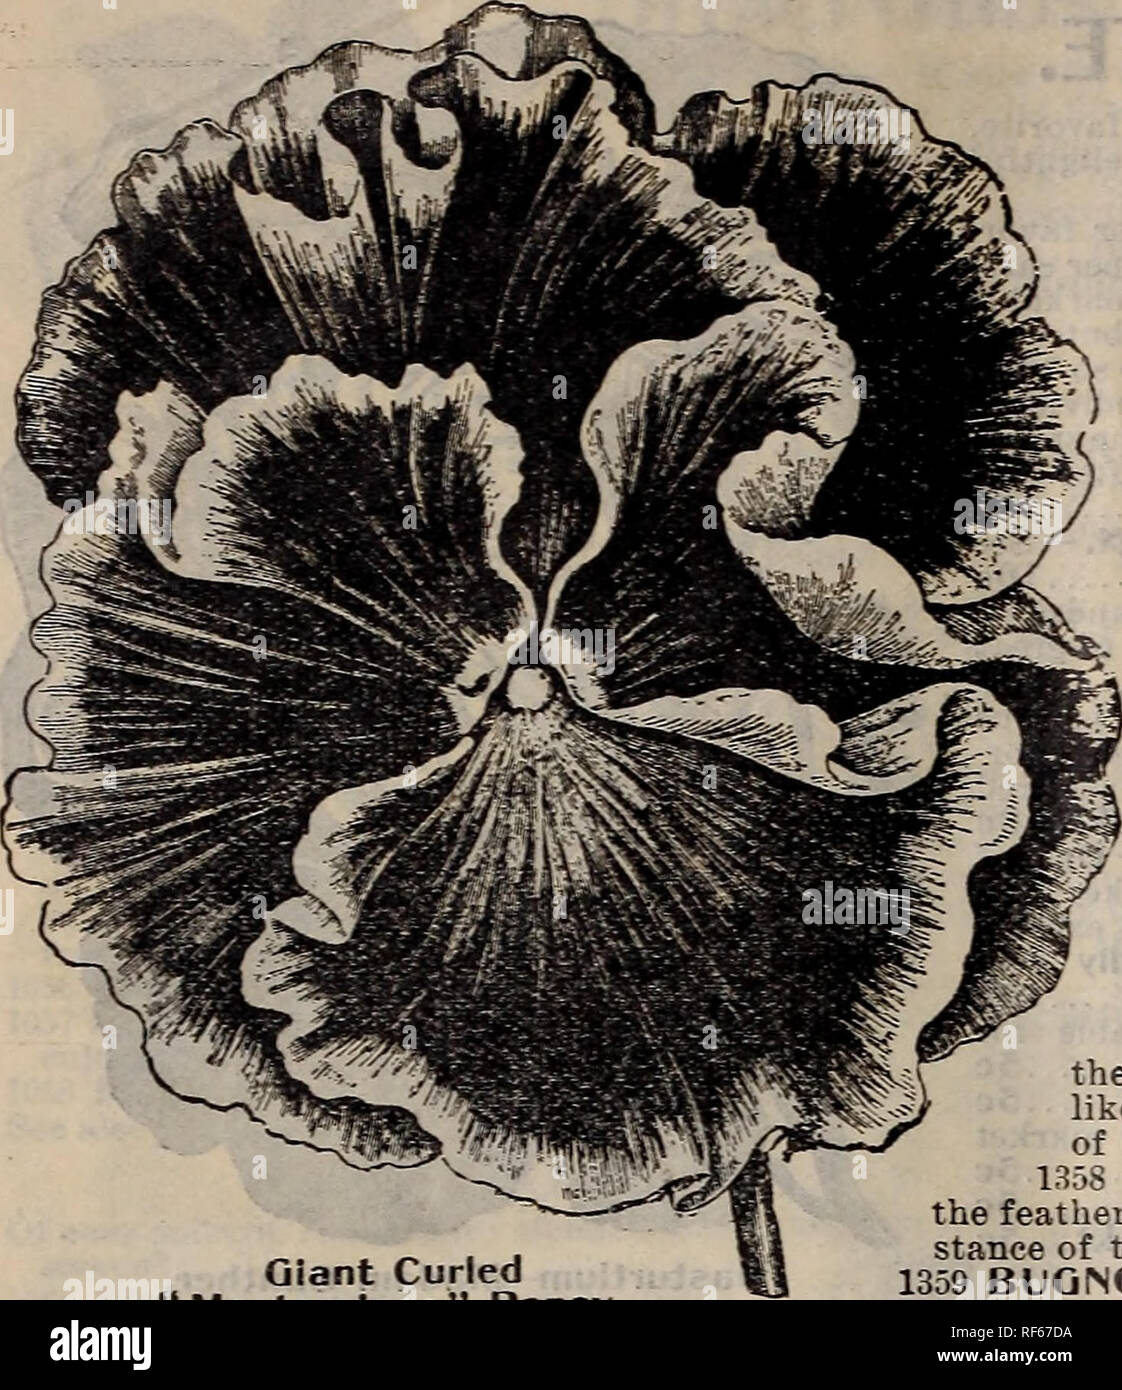 . Rennie's 1902. Nursery stock Ontario Catalogs; Seeds Catalogs; Vegetables Seeds Catalogs; Flowers Seeds Catalogs; Gardening Equipment and supplies Catalogs; Bulbs (Plants) Catalogs; Bee culture Equipment and supplies Catalogs. 60 WILLIAM RENNIE, TORONTO, CANADA.. PANSIES. Giant Curled &quot; Masterpiece &quot; Pansy. INICOTIANA. 1259 AFFINIS (Sweet-Scented Tobacco Plant.) —Large, pure -white flowers -which expand fully in the morning and evening, emitting a delicious fragrance. If cut and potted will hlooni all -winter oc 1260 Giant Red Flowering. — Suitable for the lawn, flowers dark red, l Stock Photo